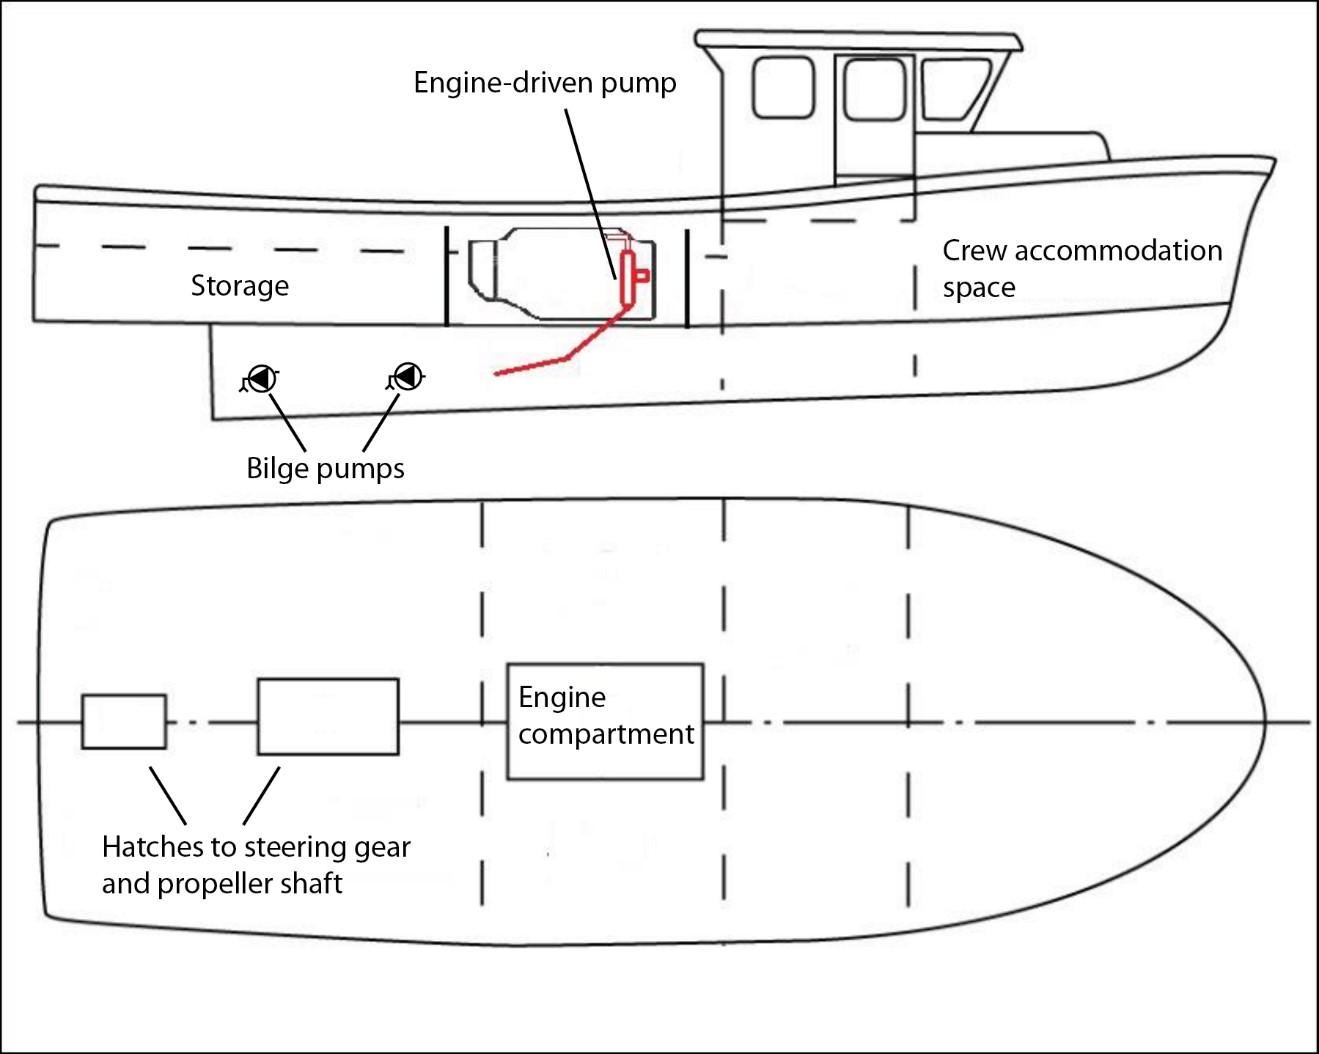 Layout of the Captain Jim